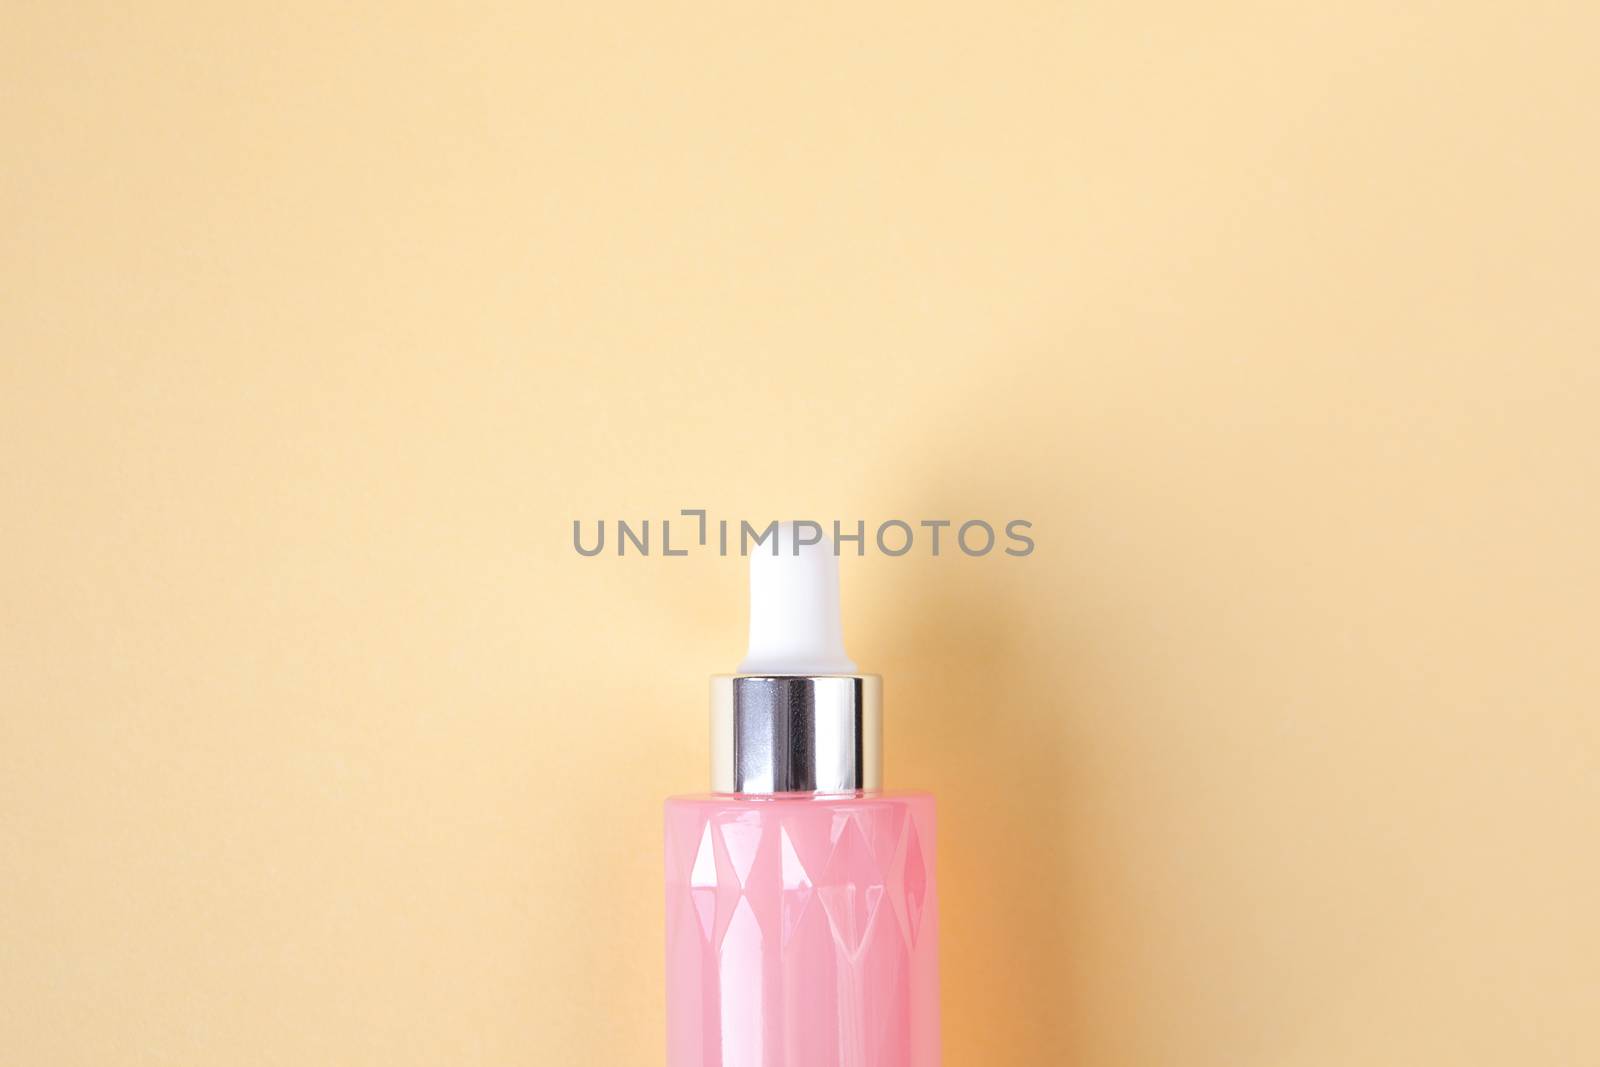 Pink glass bottle with beauty serum for face on pastel yellow background, copy space. Top view. Concept beauty rituals, homemade cosmetic, skin care. Minimal style, place for text. Horizontal.